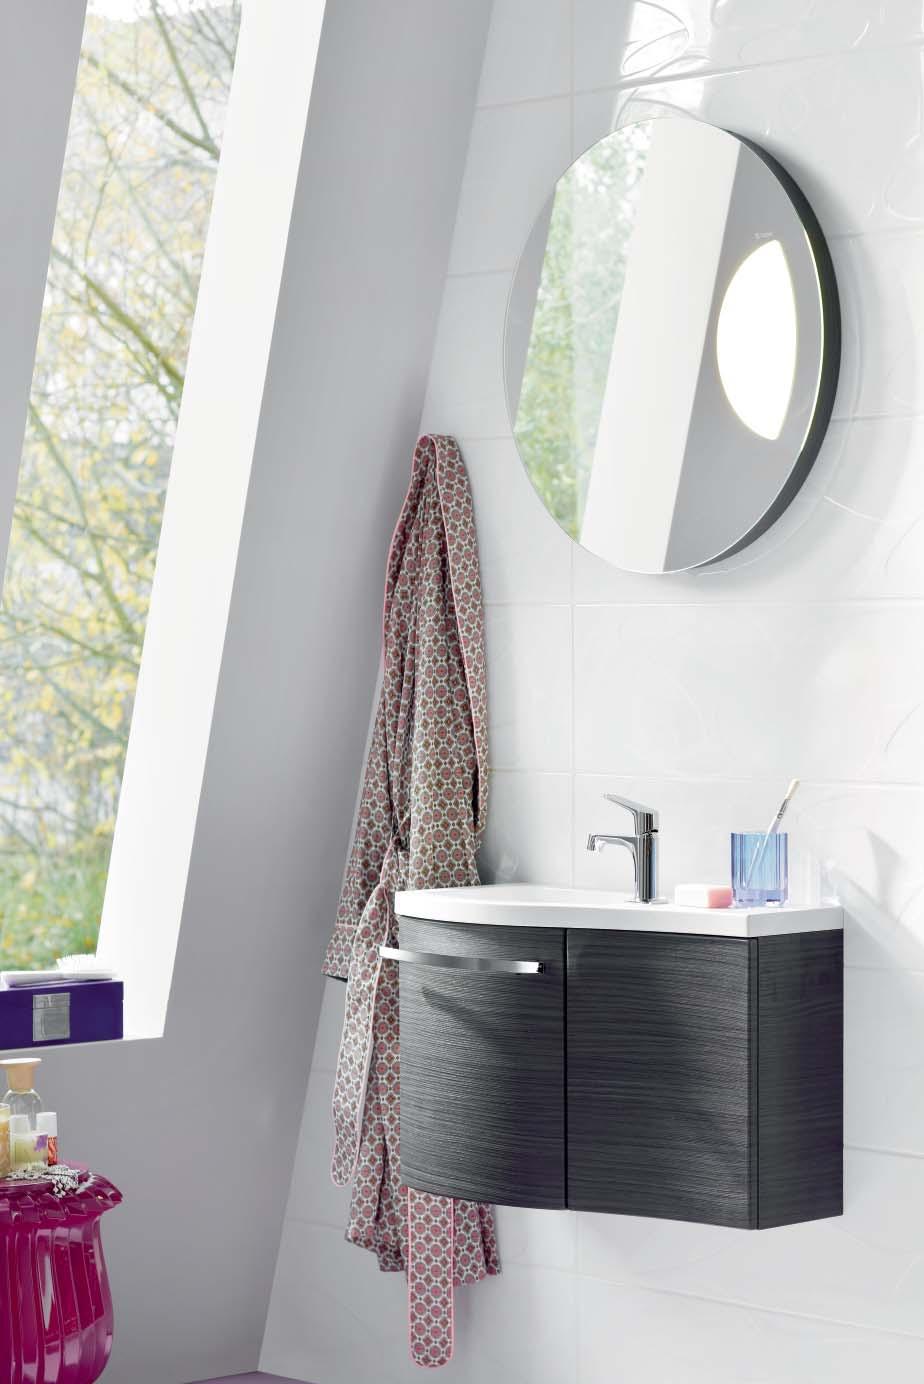 A shining white fl oor unit meets a wash basin made from black glass united in curved